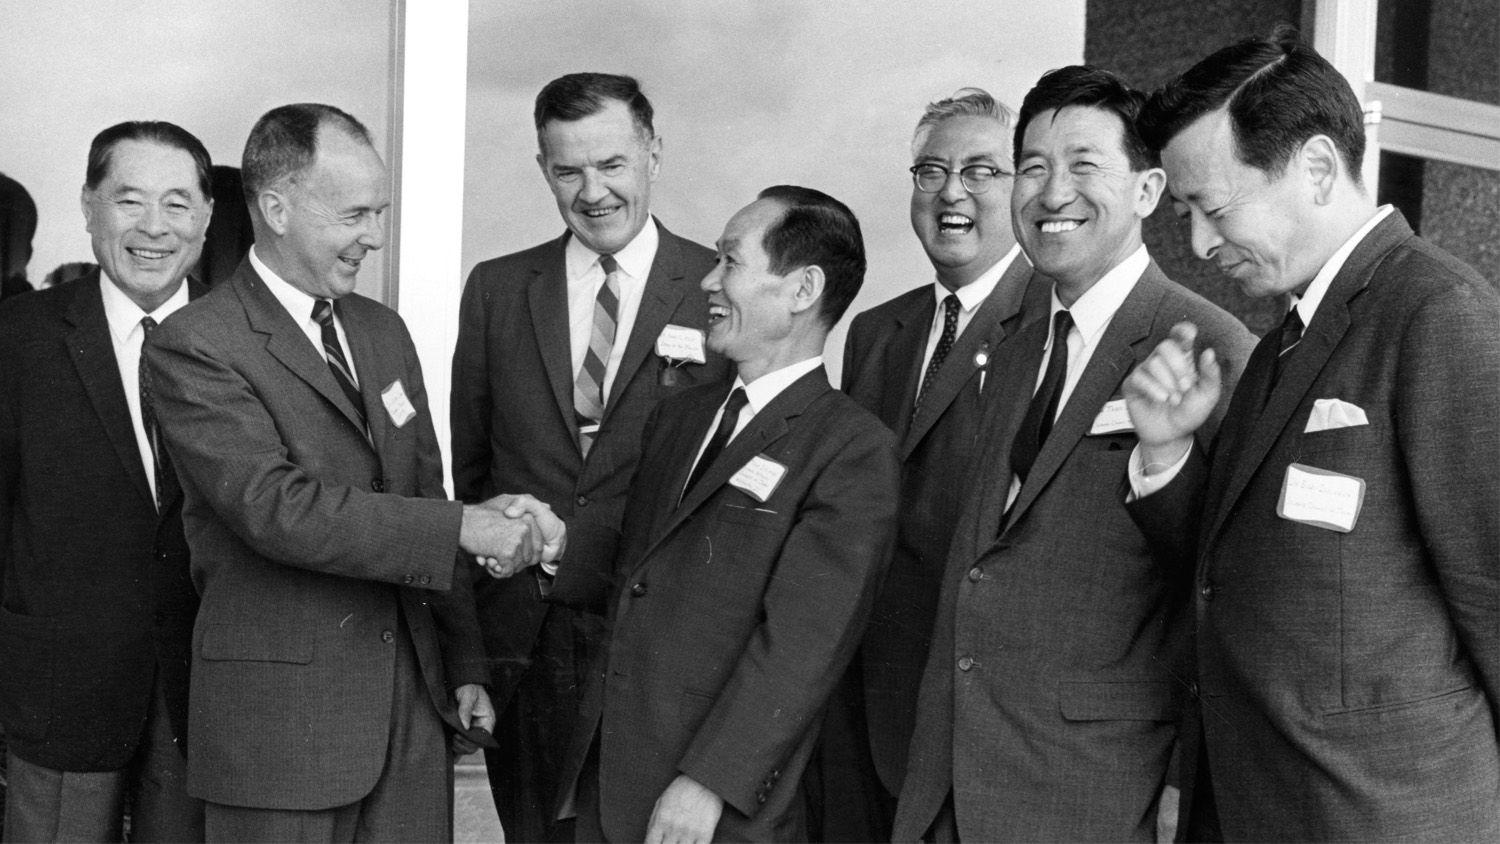 Dean Harry C. Kelly and others greeting Japanese visitors. Photo in black and white. 